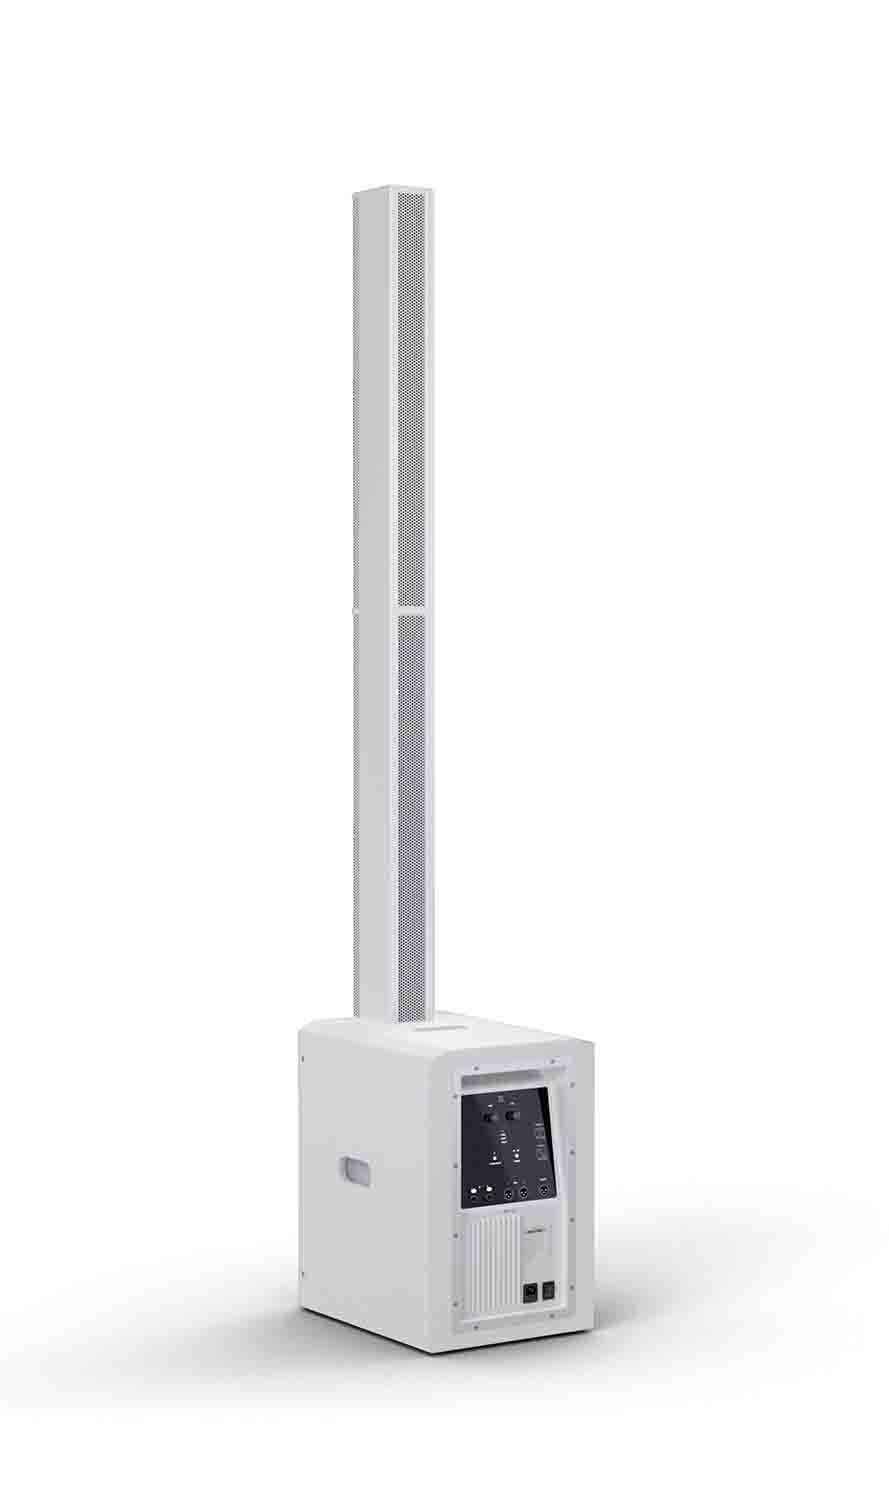 B-Stock: LD System MAUI 28 G3 W, Compact Cardioid Powered Column PA System - White LD Systems